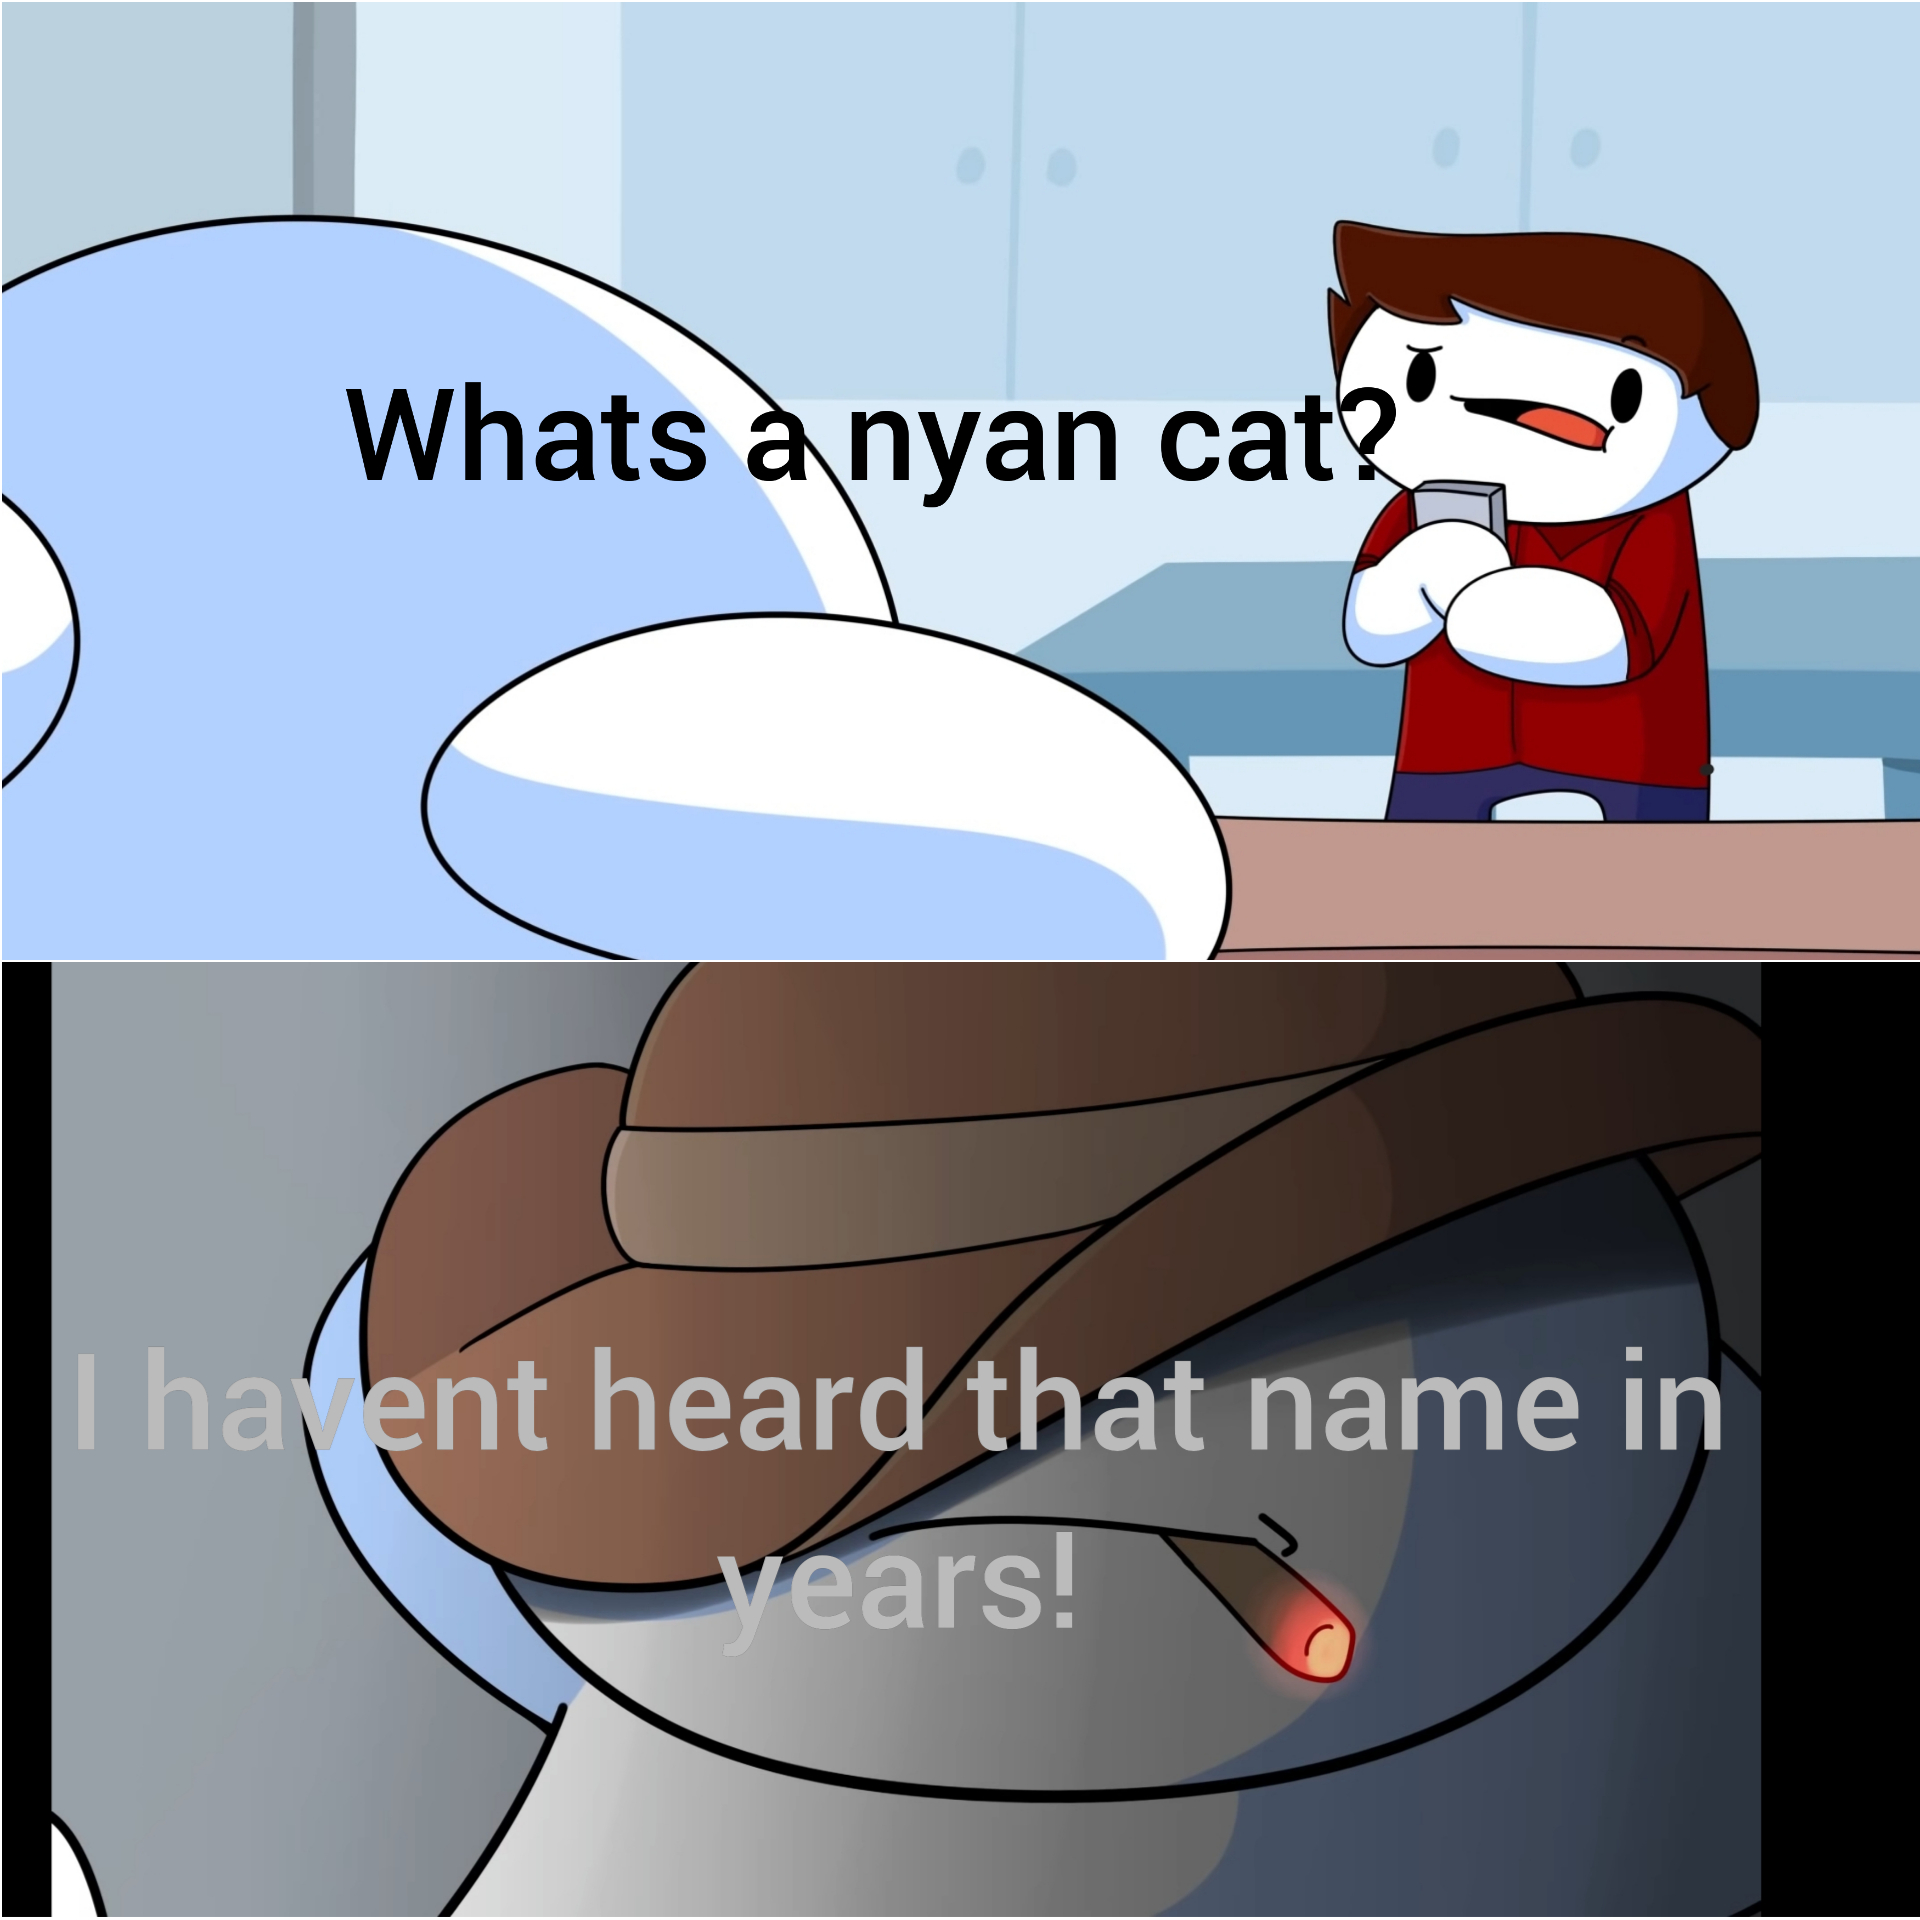 cartoon - Whats a nyan cat? | harlent heard that name in vears!